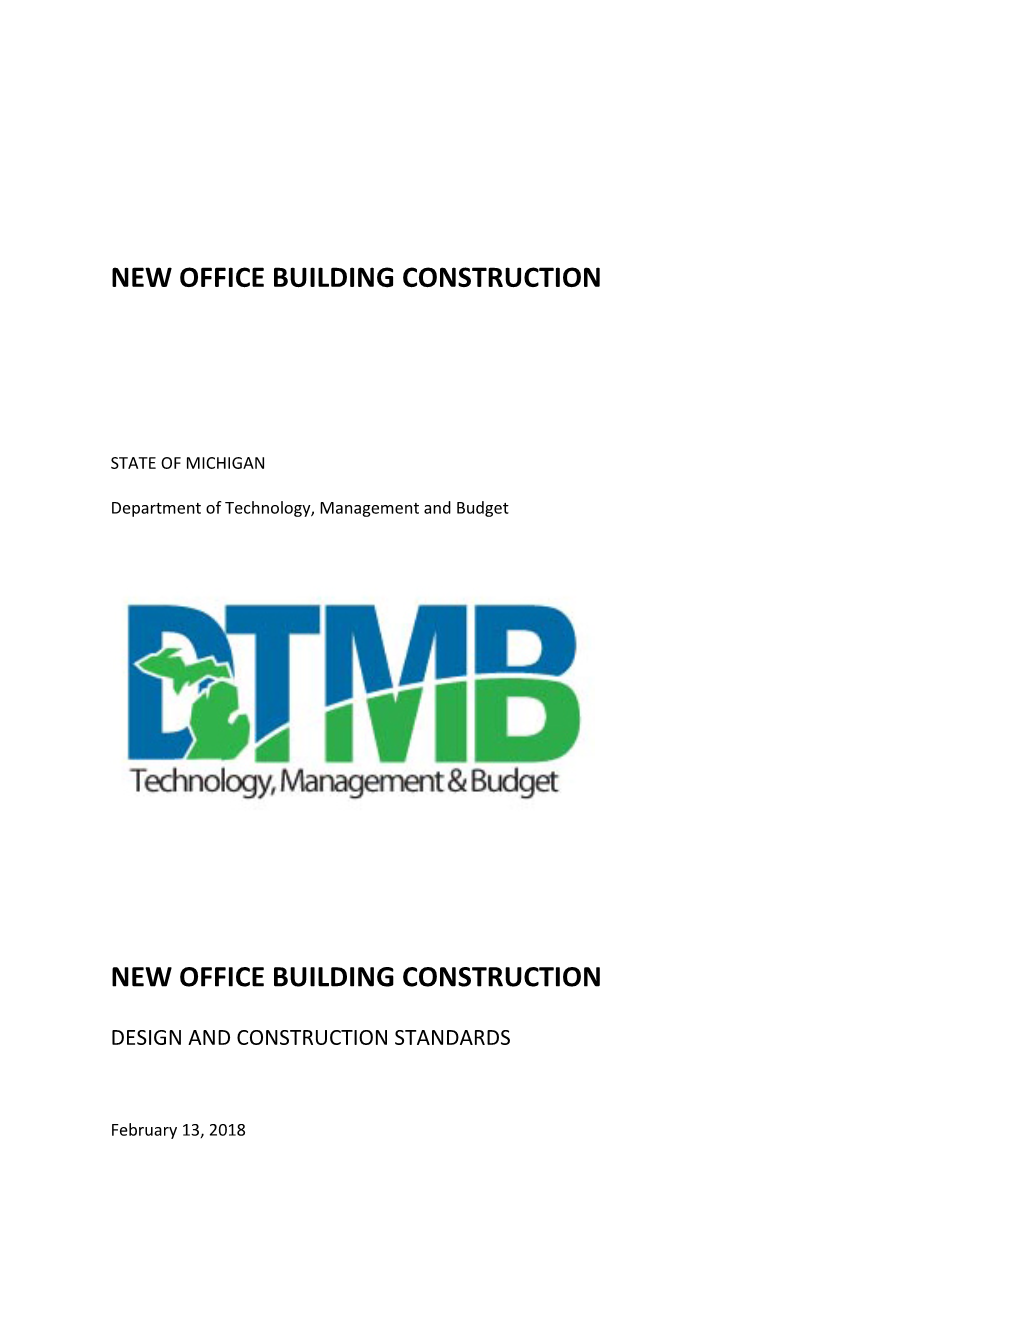 New Office Building Construction